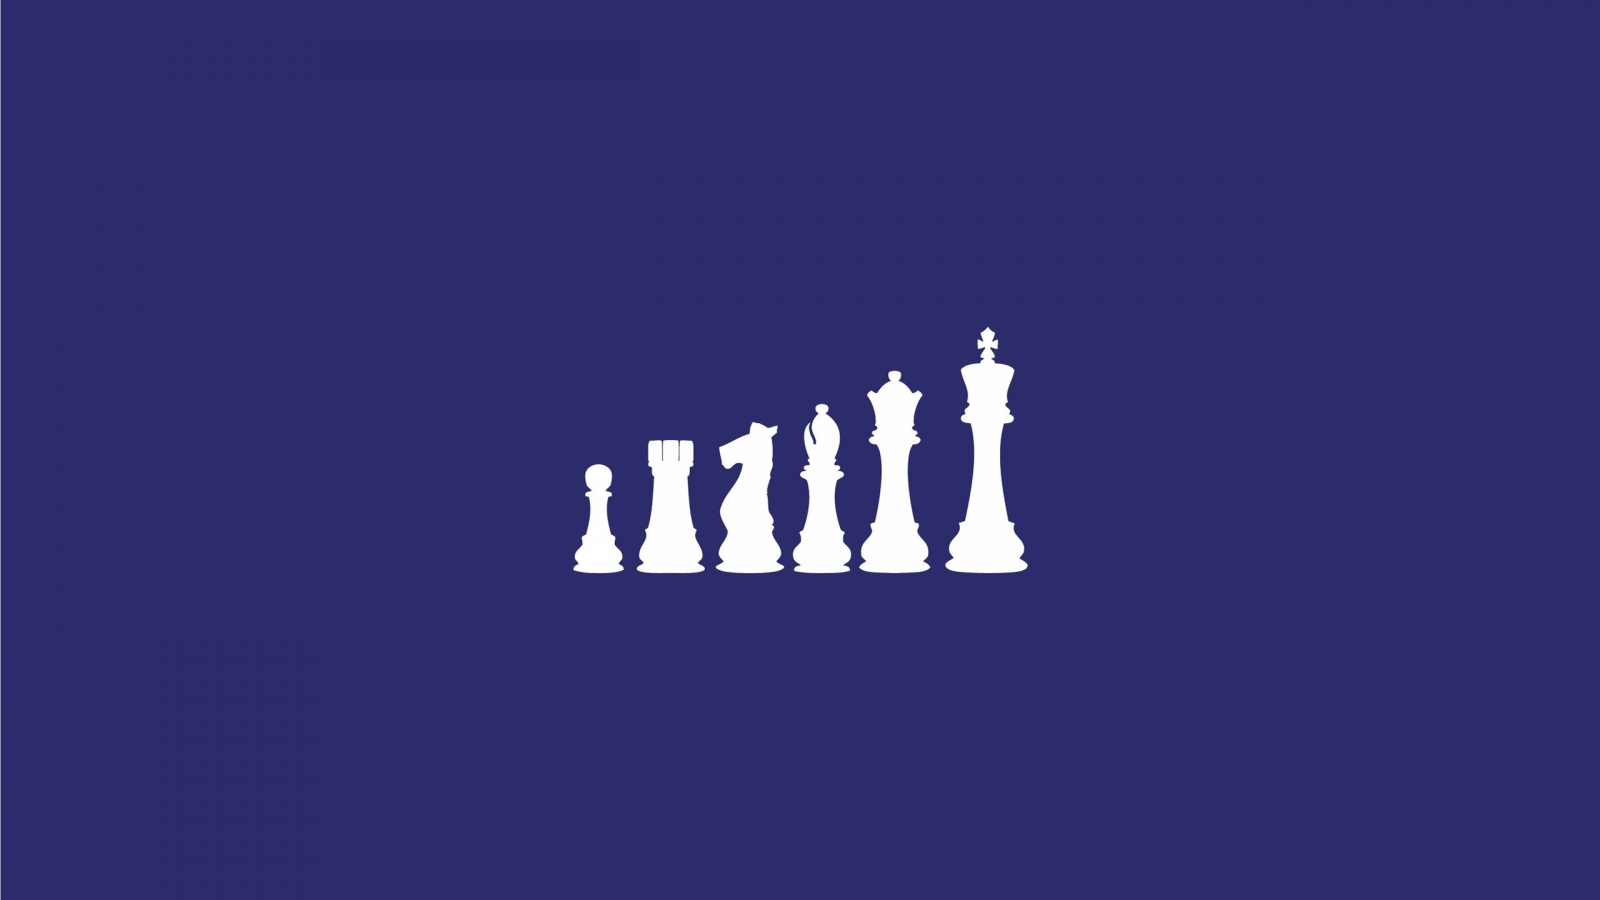 Chess Figures for 1600 x 900 HDTV resolution